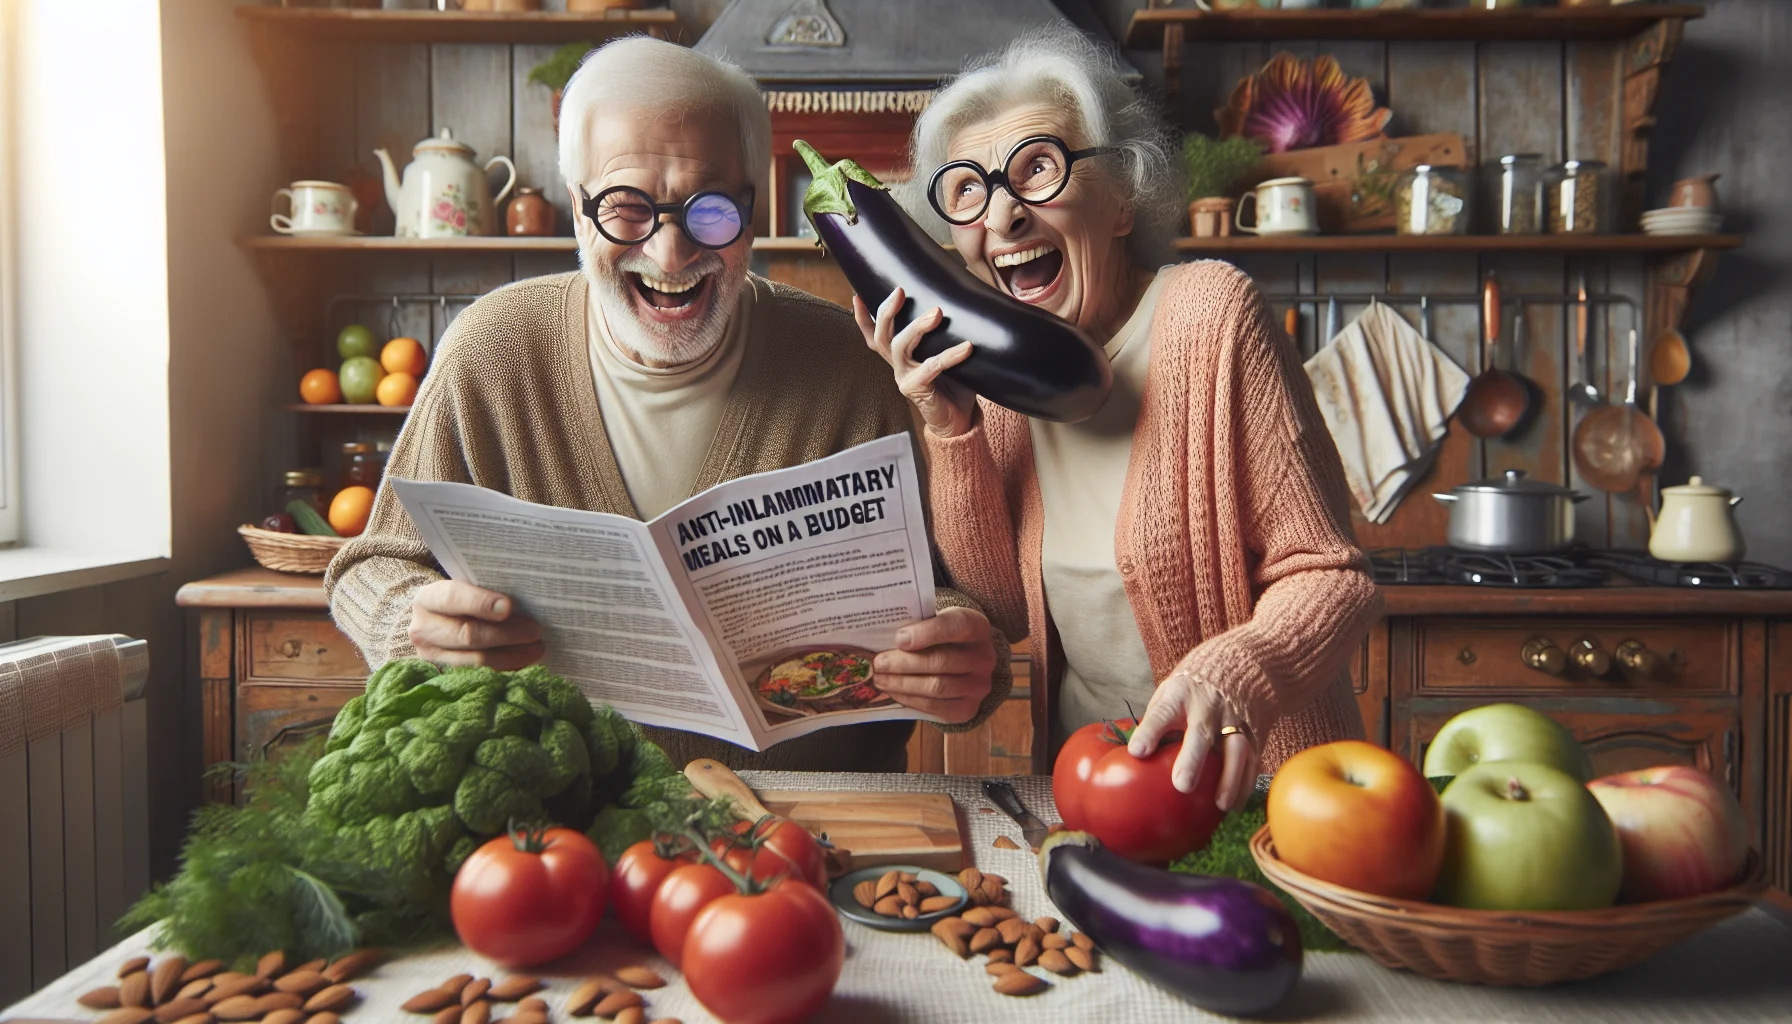 Create a humorous, realistic scene in a cosy old-fashioned kitchen during the day. An elderly Caucasian man with spectacles is laughing while reading an instruction manual titled 'Anti-inflammatory meals on a budget'. Simultaneously, a Middle-Eastern elderly woman is animatedly making a funny face, holding up a large vibrant purple eggplant as though it's a telephone. They are surrounded by a variety of affordable, colorful fruits and vegetables like green leafy vegetables, tomatoes, almonds and oranges, all indicative of an anti-inflammatory diet.